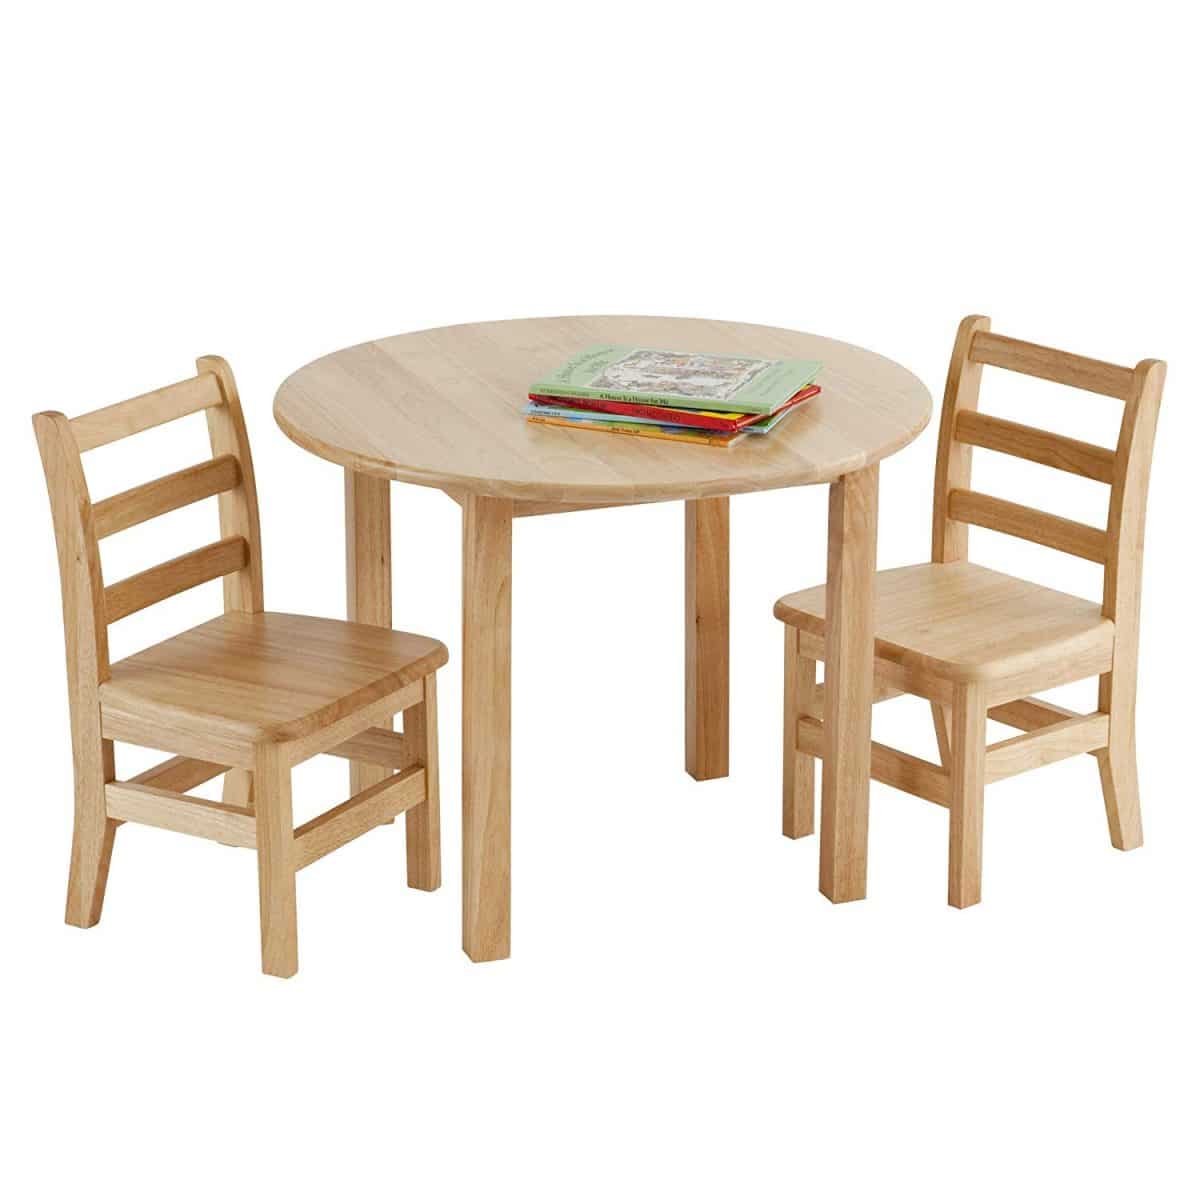 unfinished childrens table and chairs